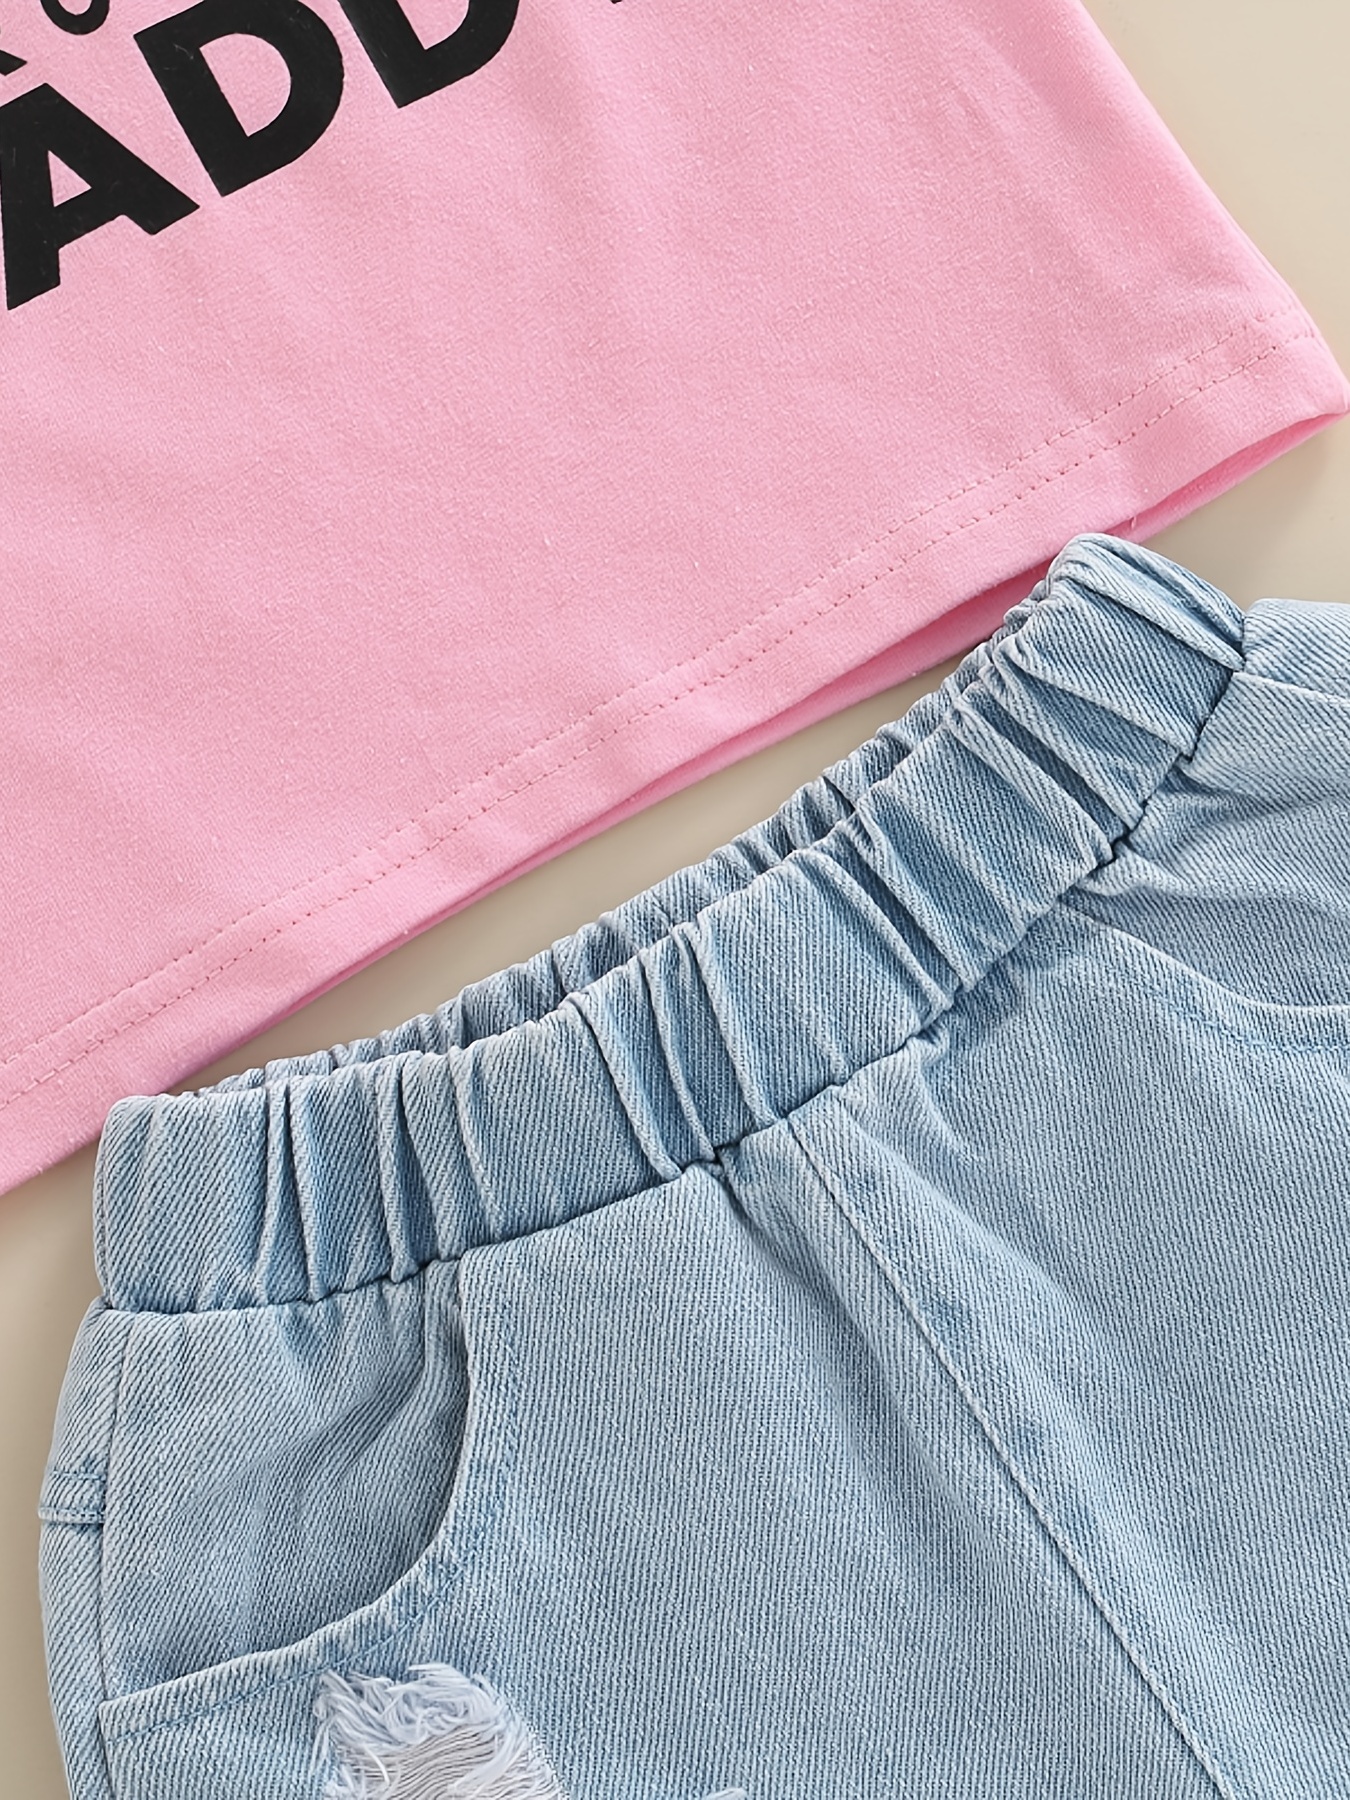 Clothing Sets Summer Kids Girls Clothes Set Teen Girl Crop Tops Tshirt  Denim Shorts Girl Outfits Baby Girls Clothing 4 7 10 To 12 Year 230417 From  12,07 €